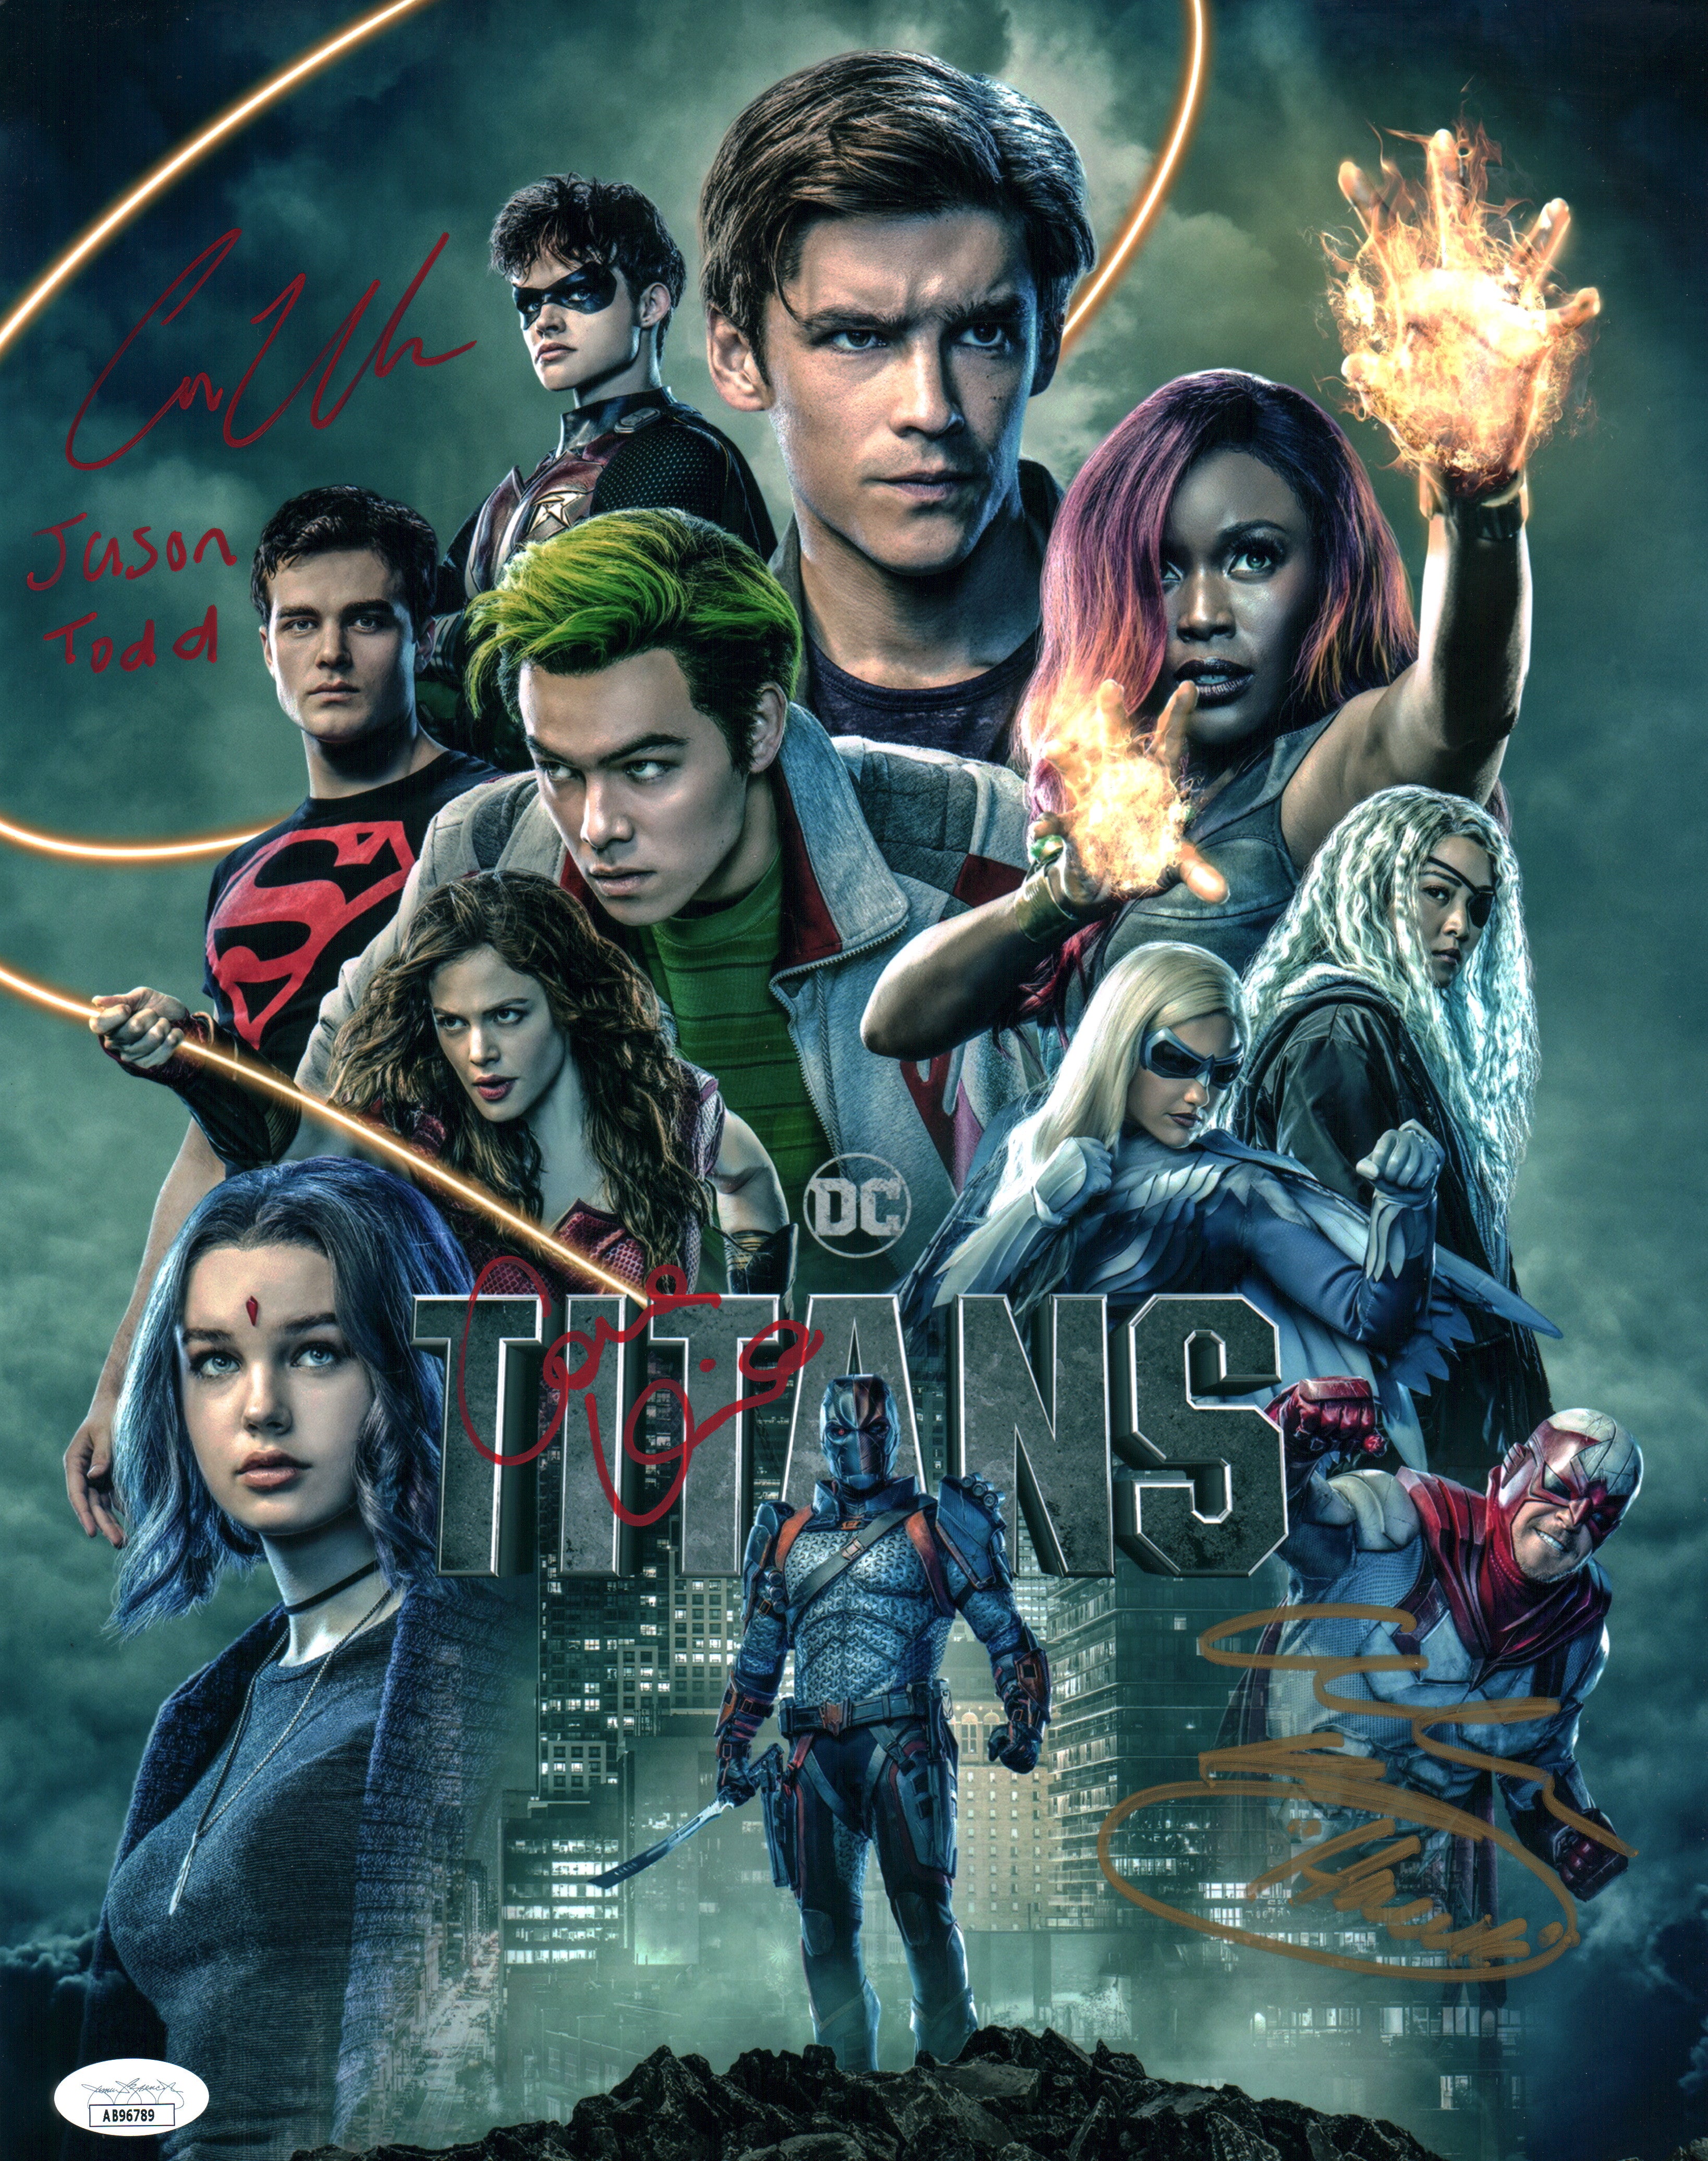 Titans 11x14 Cast Photo Poster x3 Signed Walters Ritchson Leslie JSA Certified Autograph